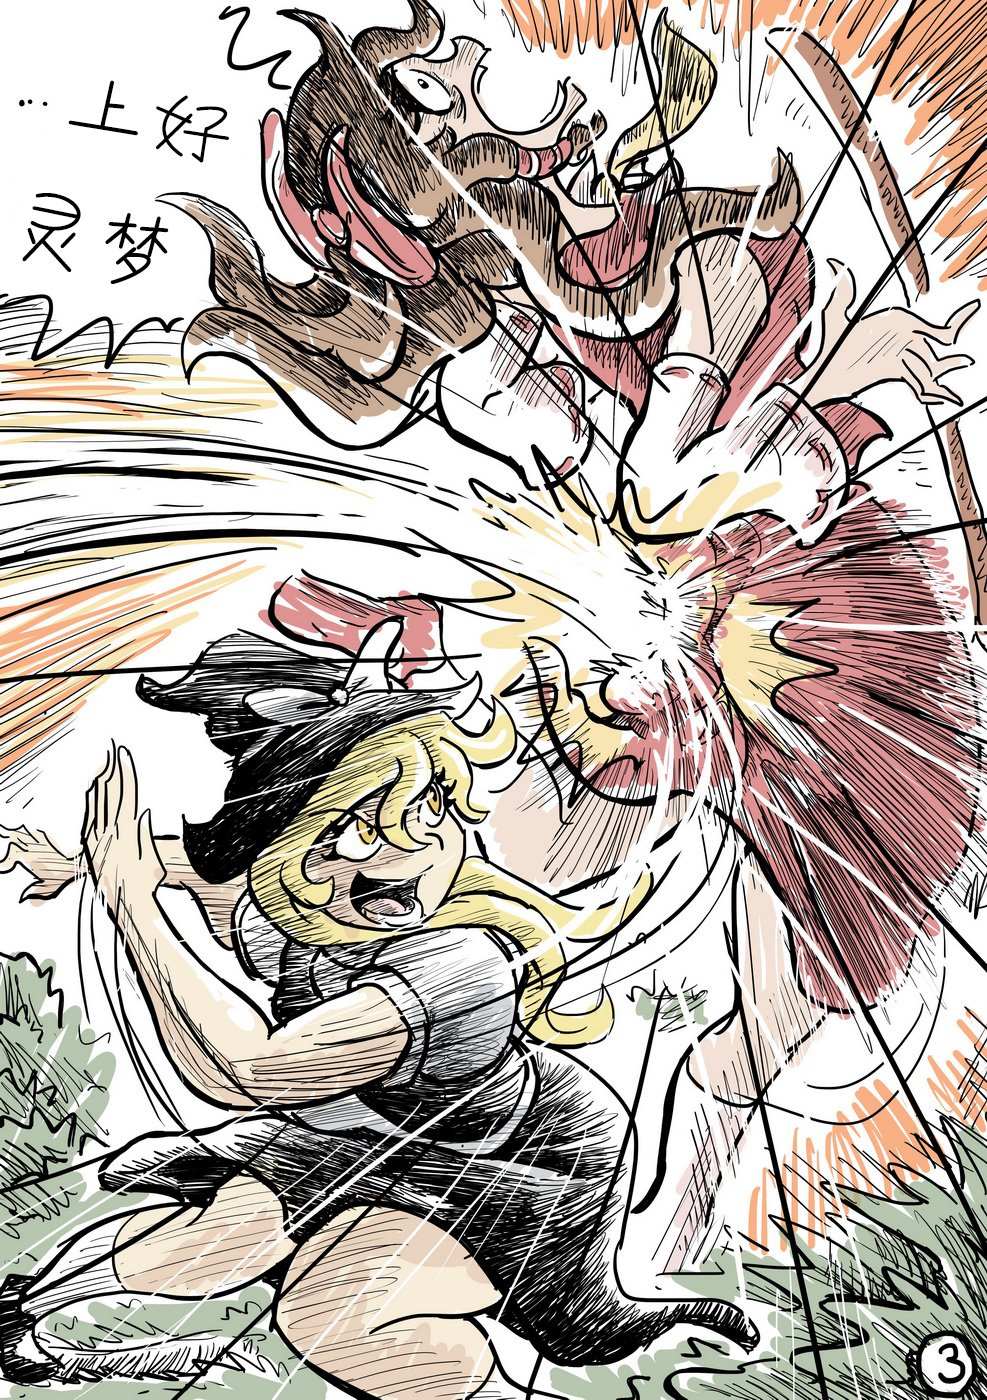 [Tuteheavy] MARISA SPEEEED!! (Touhou Project) [Chinese] 